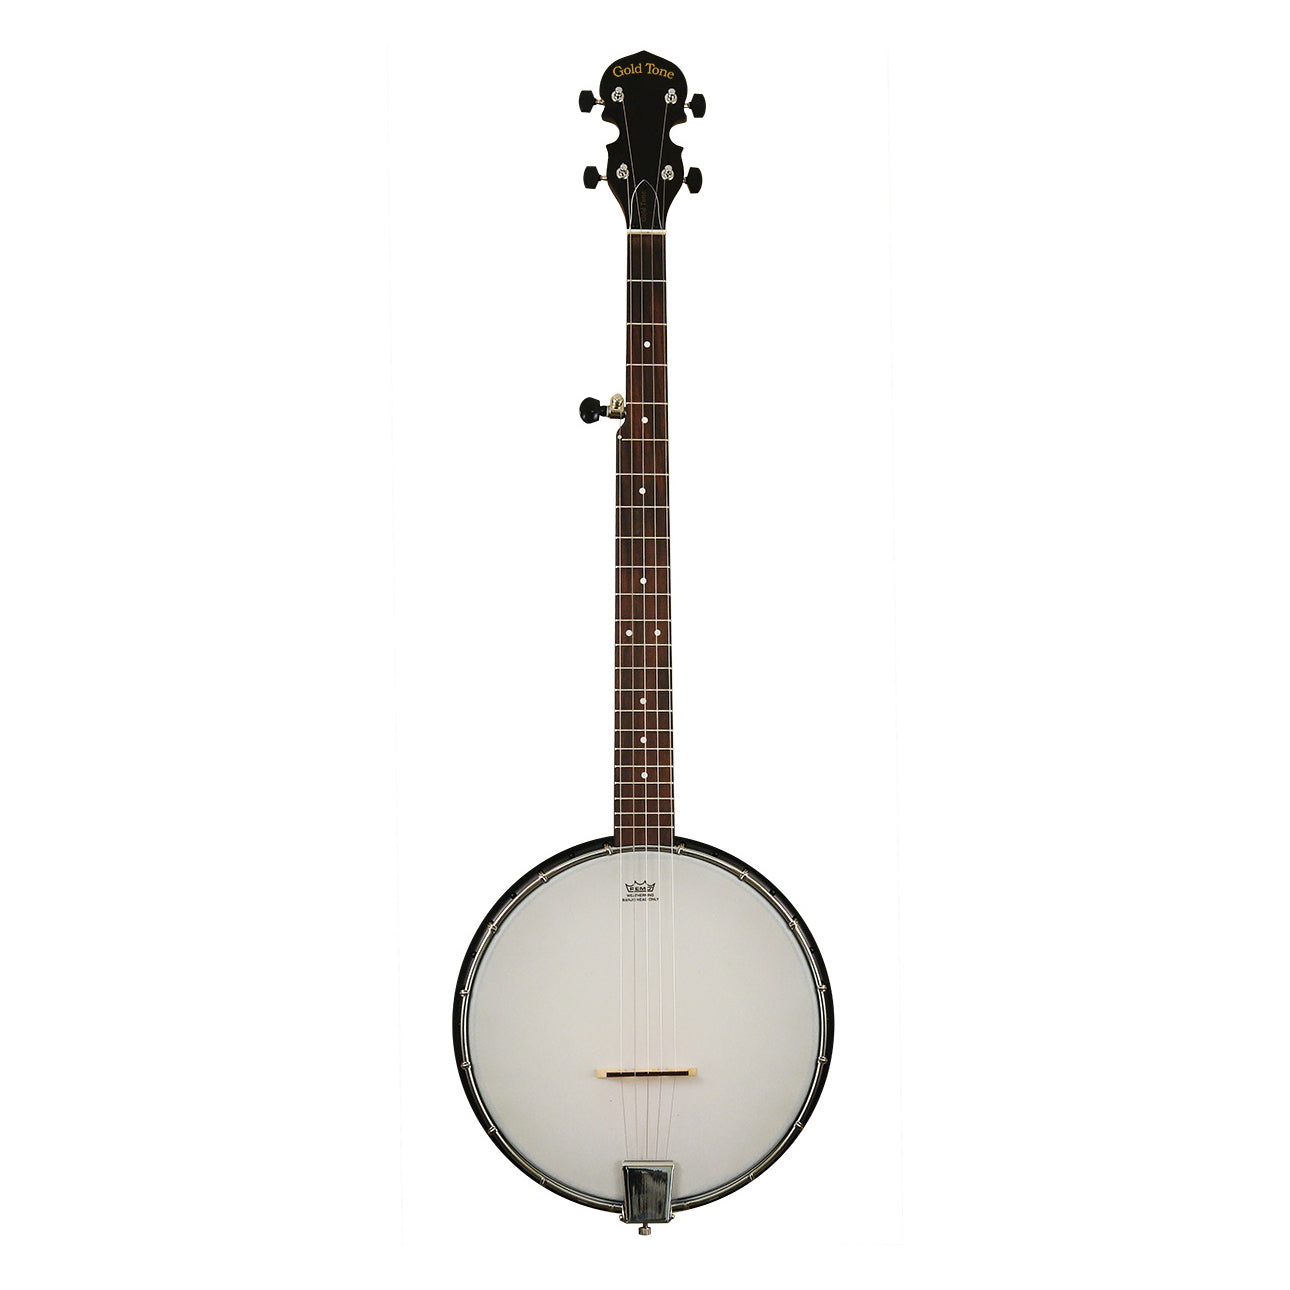 Gold Tone AC-1 Acoustic Composite 5- String Open Back Banjo with bag